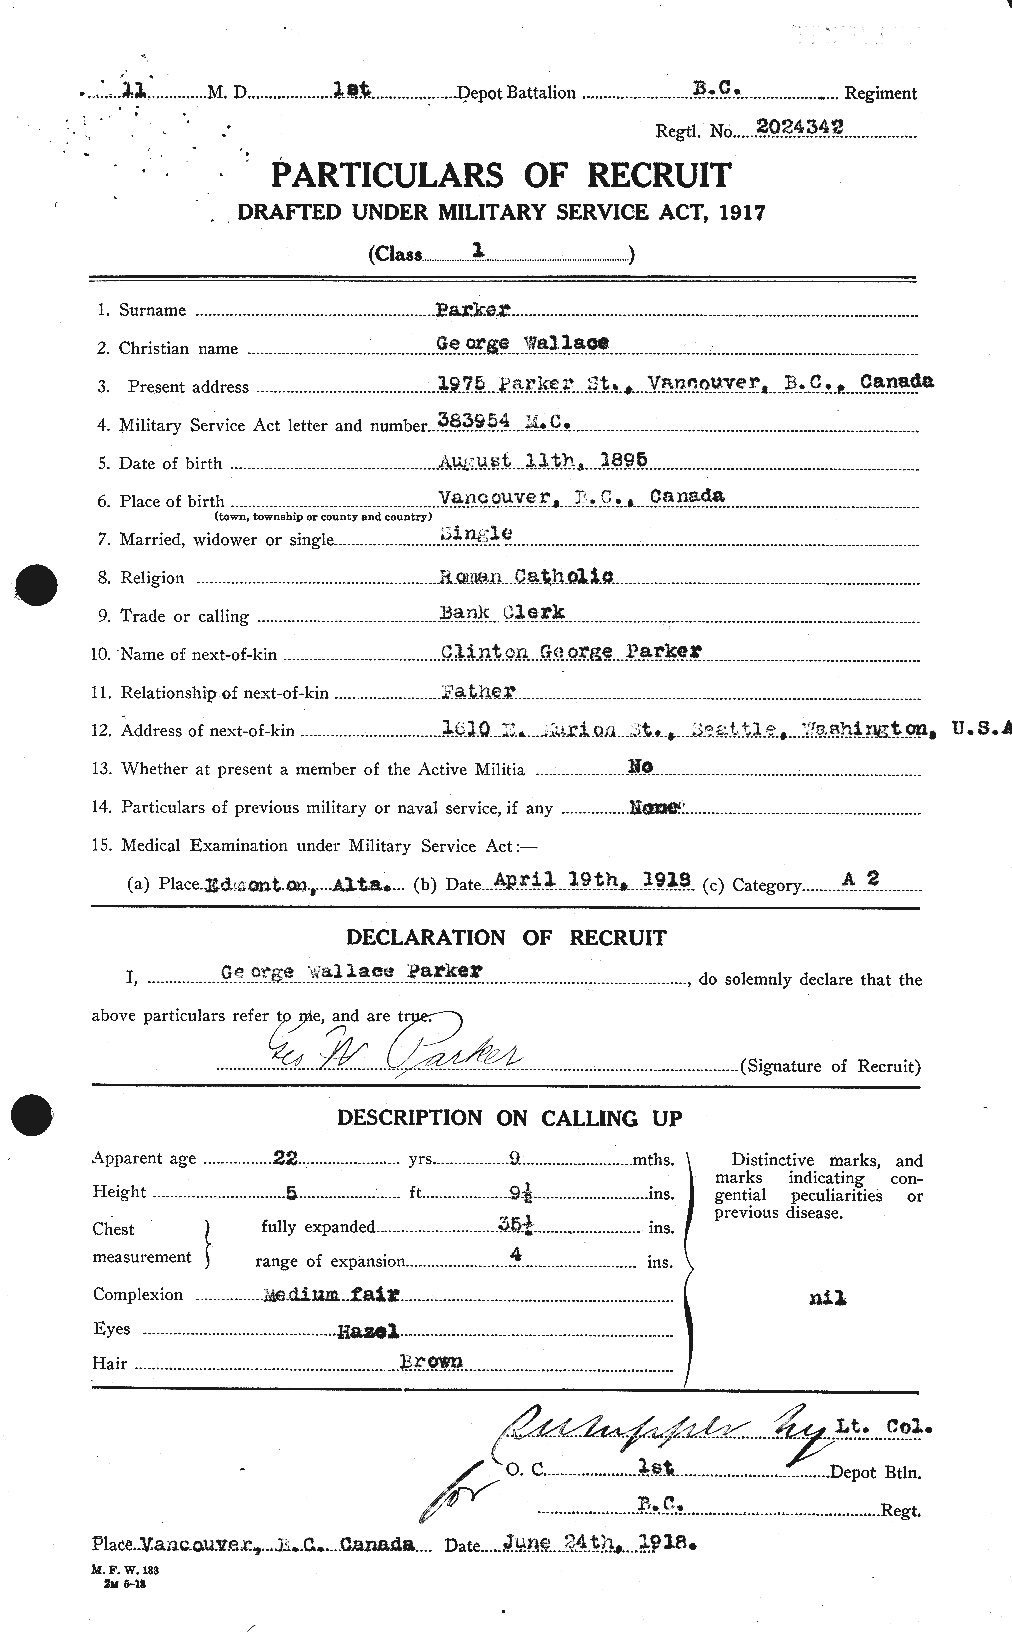 Personnel Records of the First World War - CEF 565283a